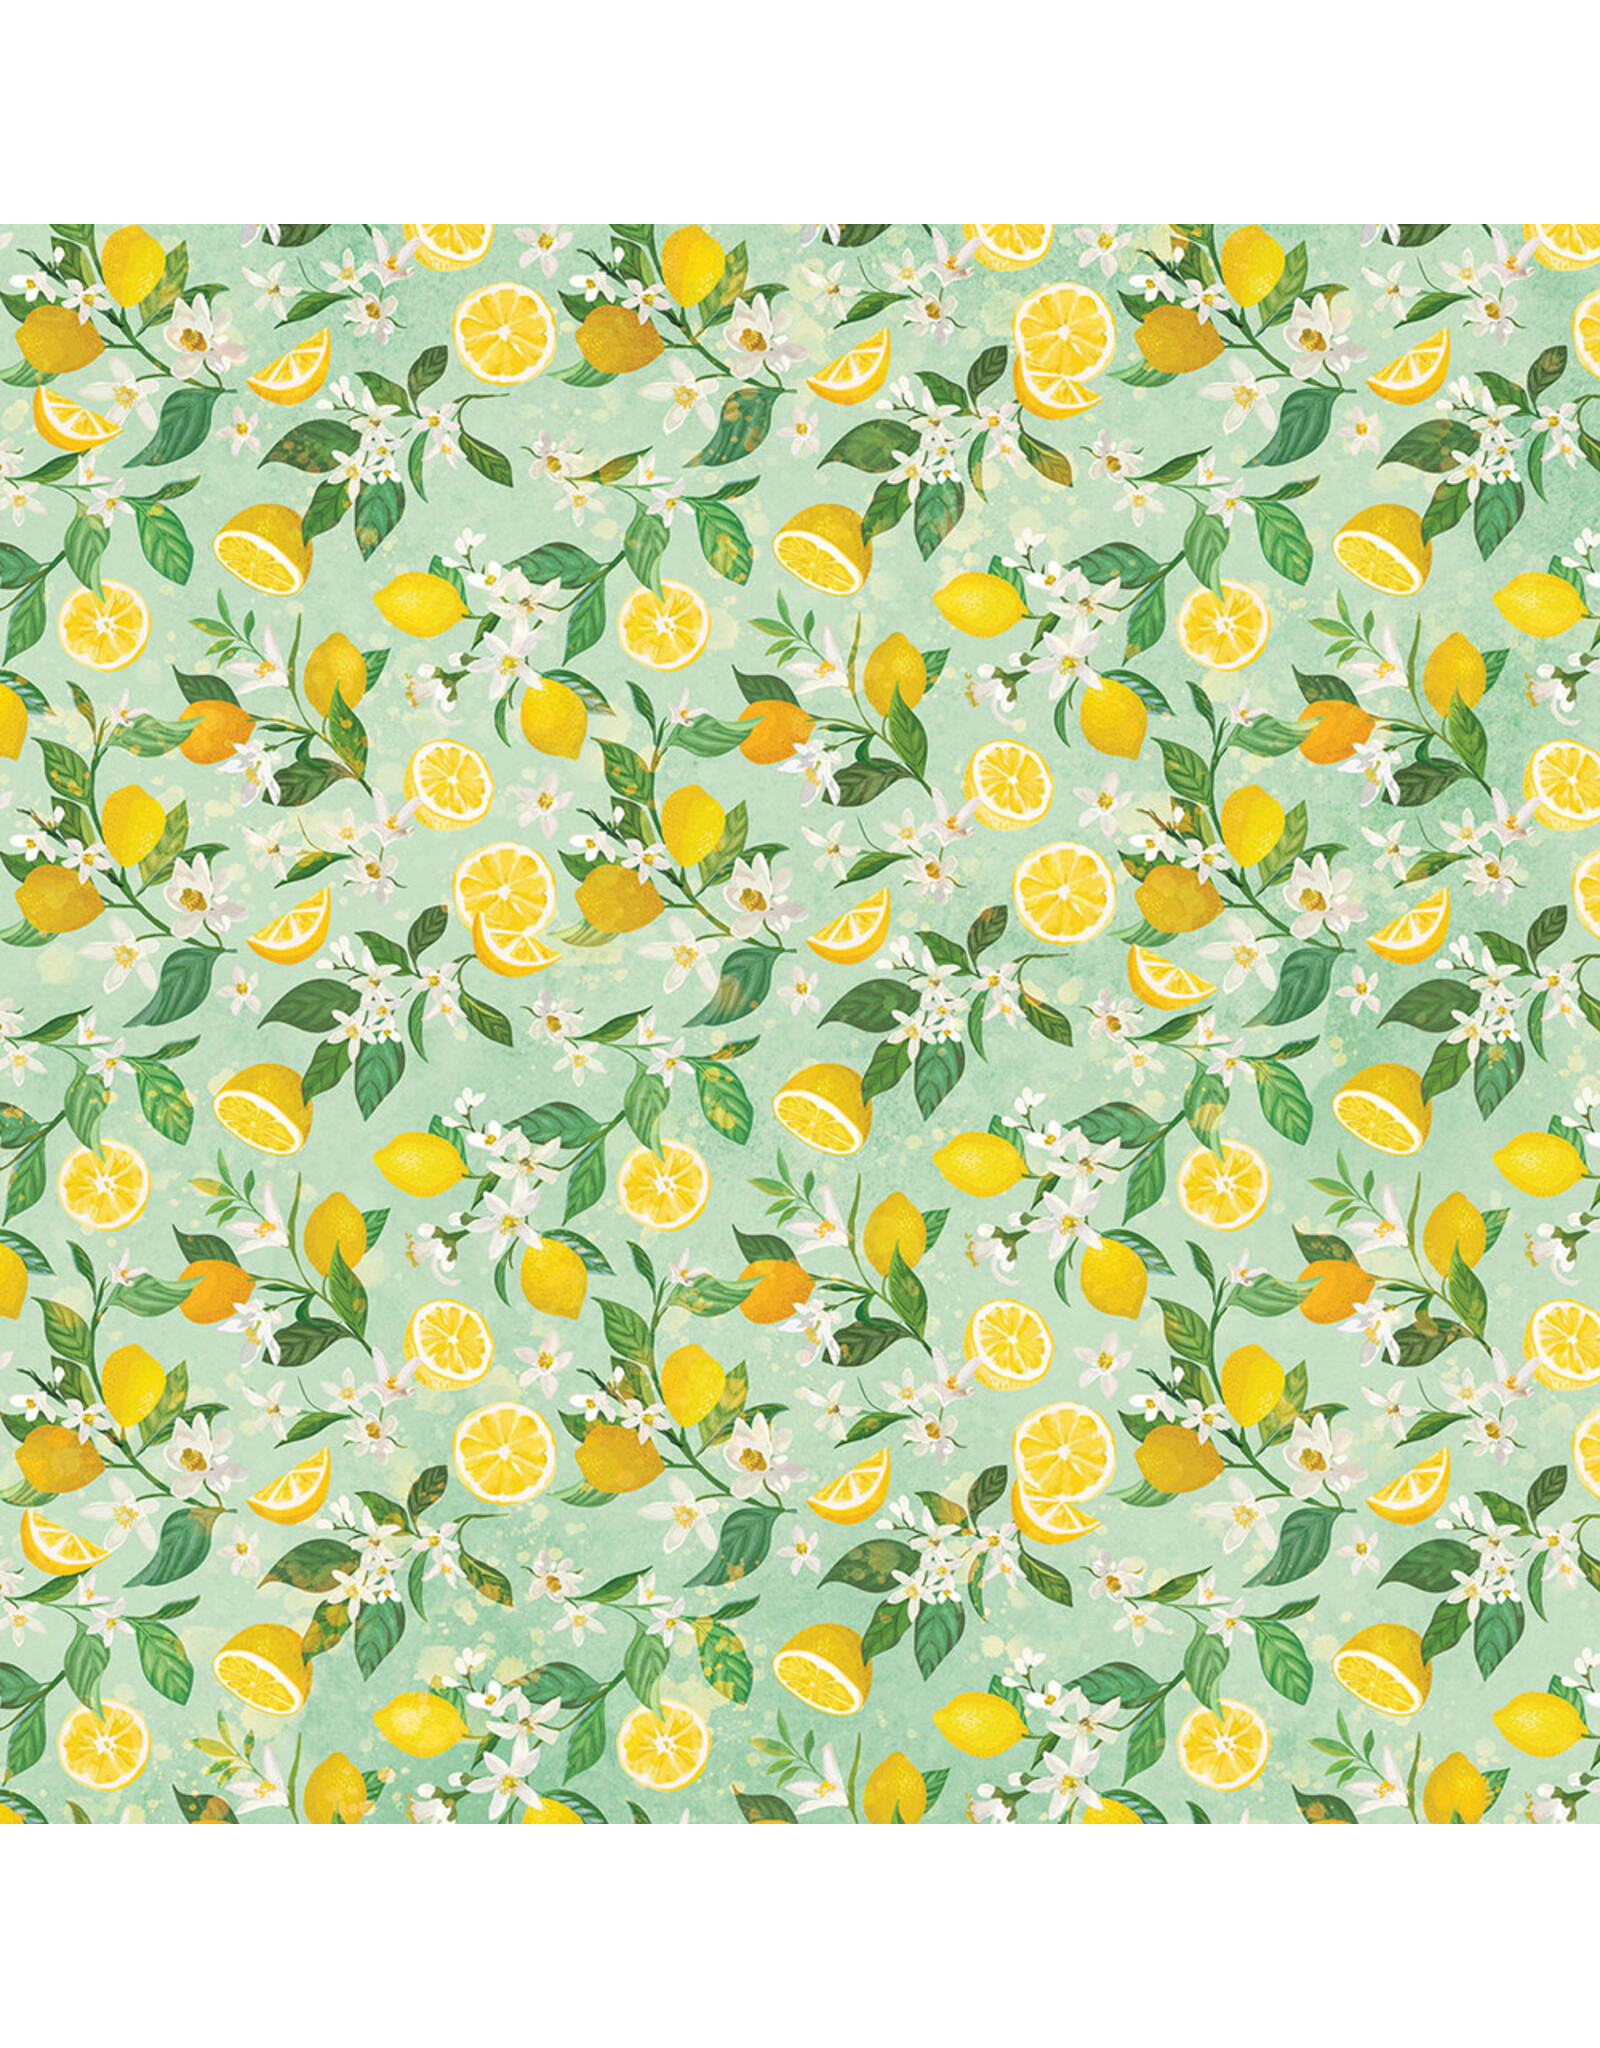 PHOTOPLAY PAPER PHOTOPLAY MICHELLE COLEMAN FRESH PICKED 2 LEMON TWIST 12X12 CARDSTOCK